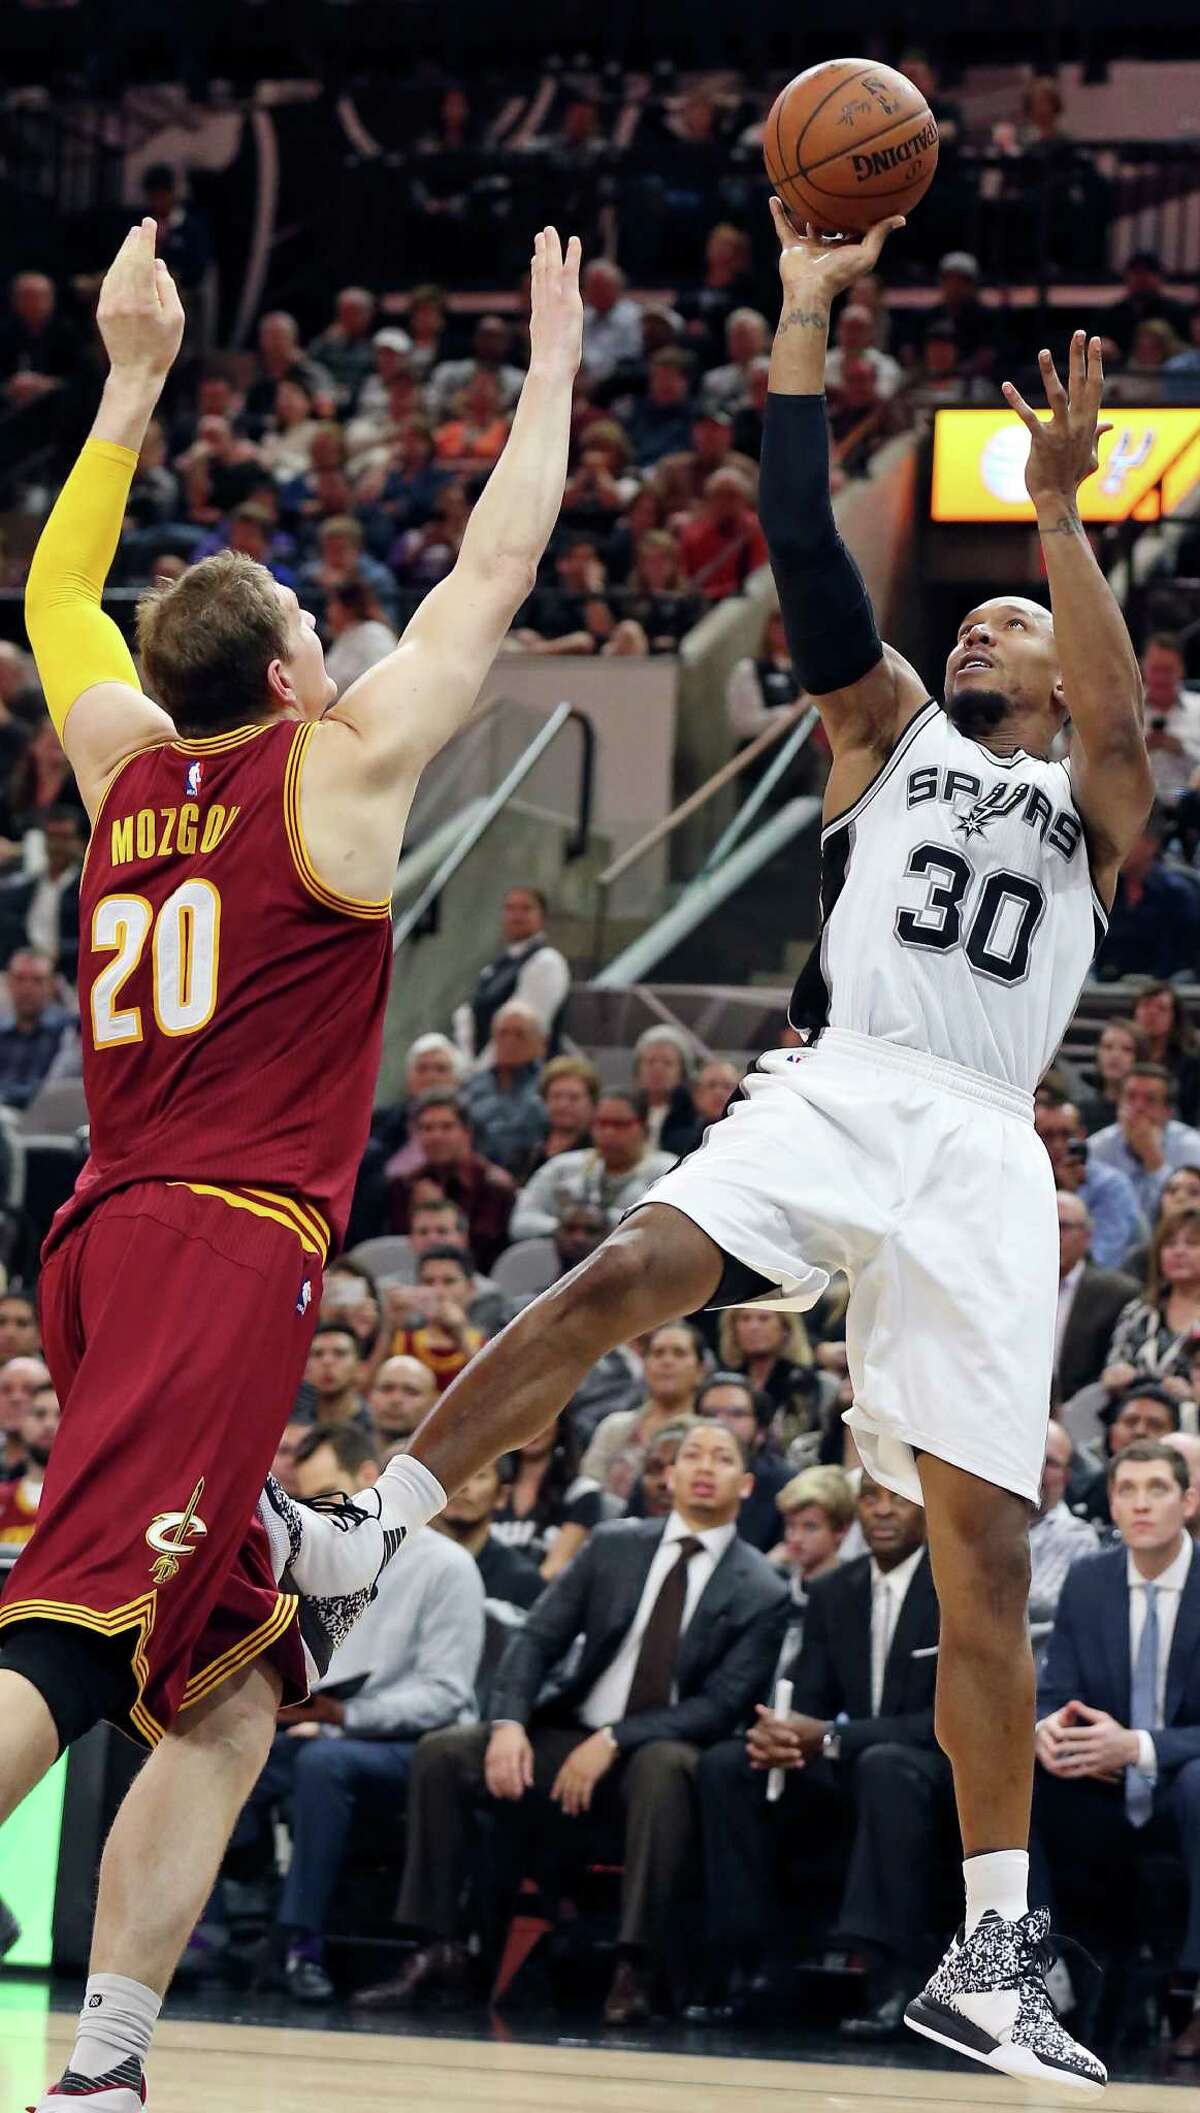 Spurs’ David West shoots around the Cleveland Cavaliers’ Timofey Mozgov during second half action on Jan. 14, 2016 at the AT&T Center.